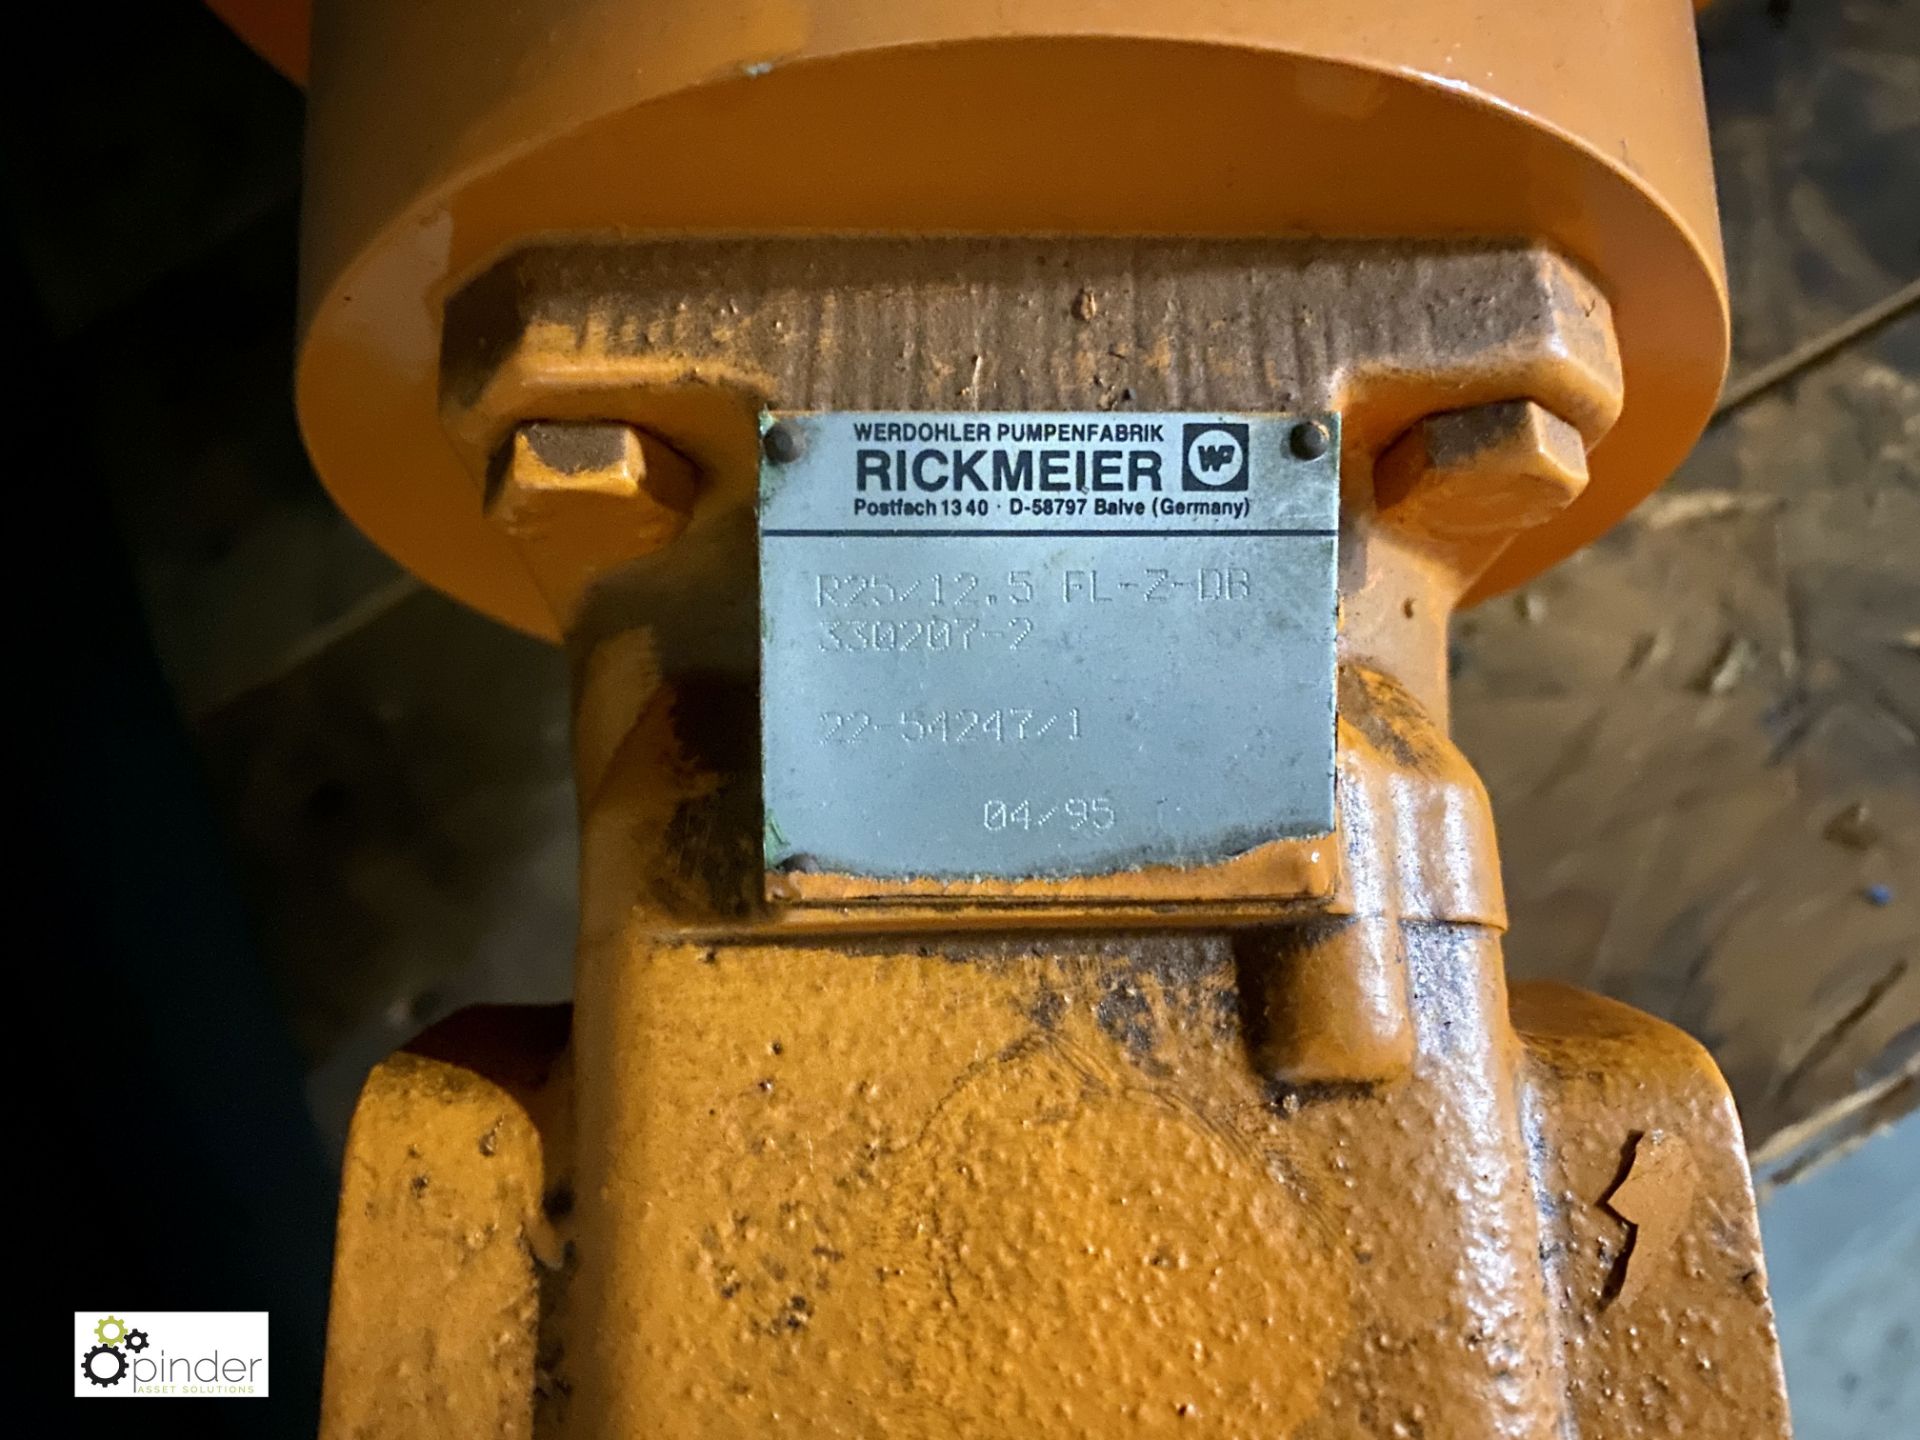 Richmeier Electric Motor, 0.55kw, 1380rpm and Pump R25/12.5 FL-Z-DB (PE655 001) (please note there - Image 2 of 3